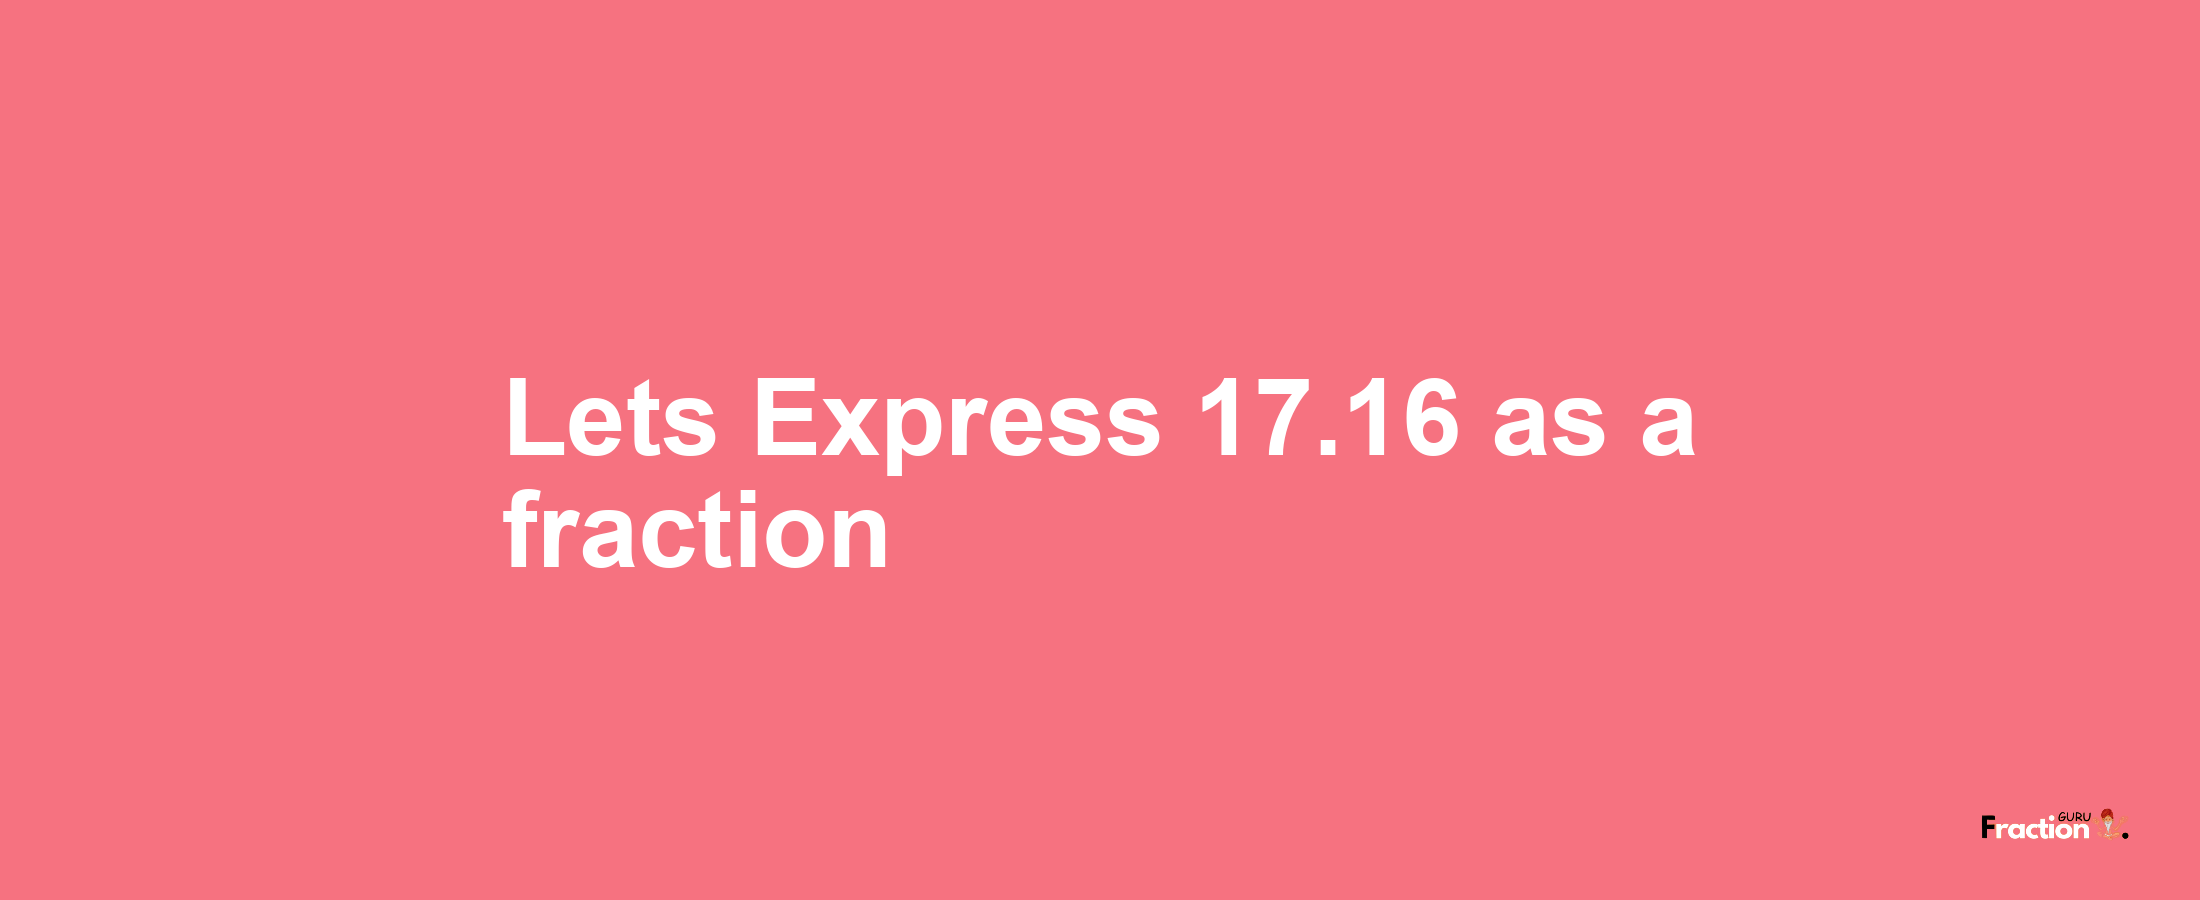 Lets Express 17.16 as afraction